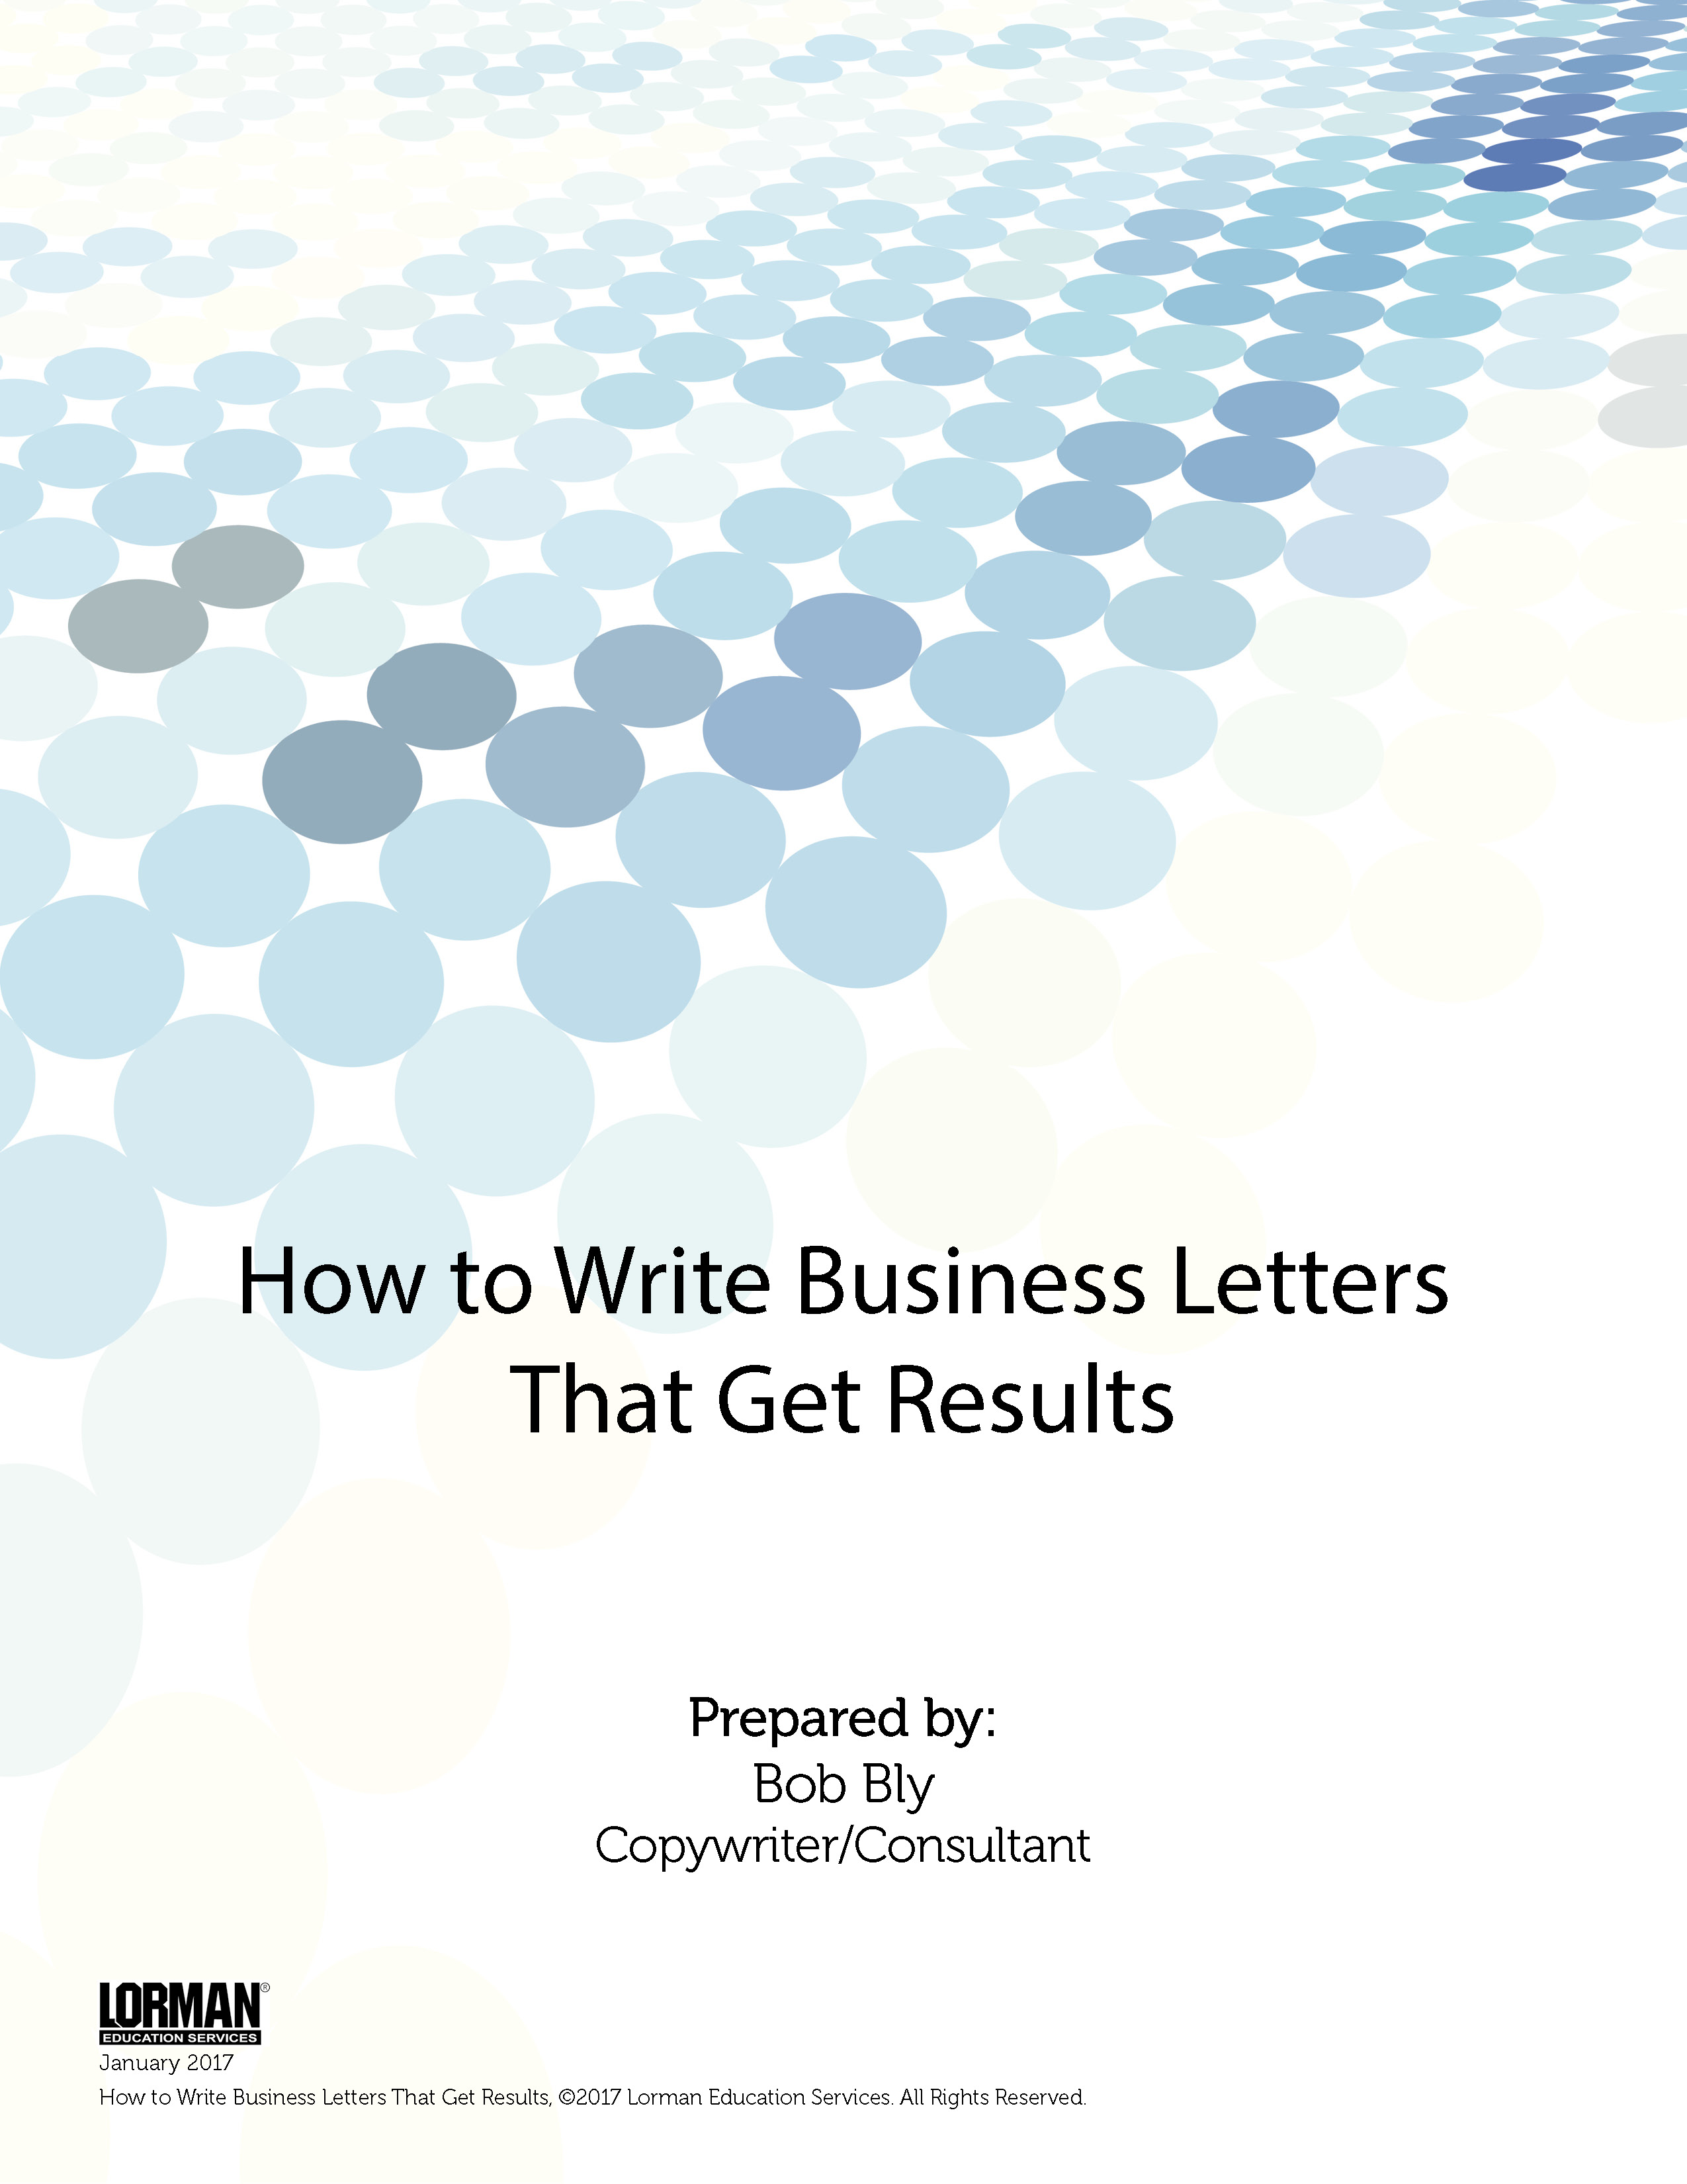 How to Write Business Letters That Get Results